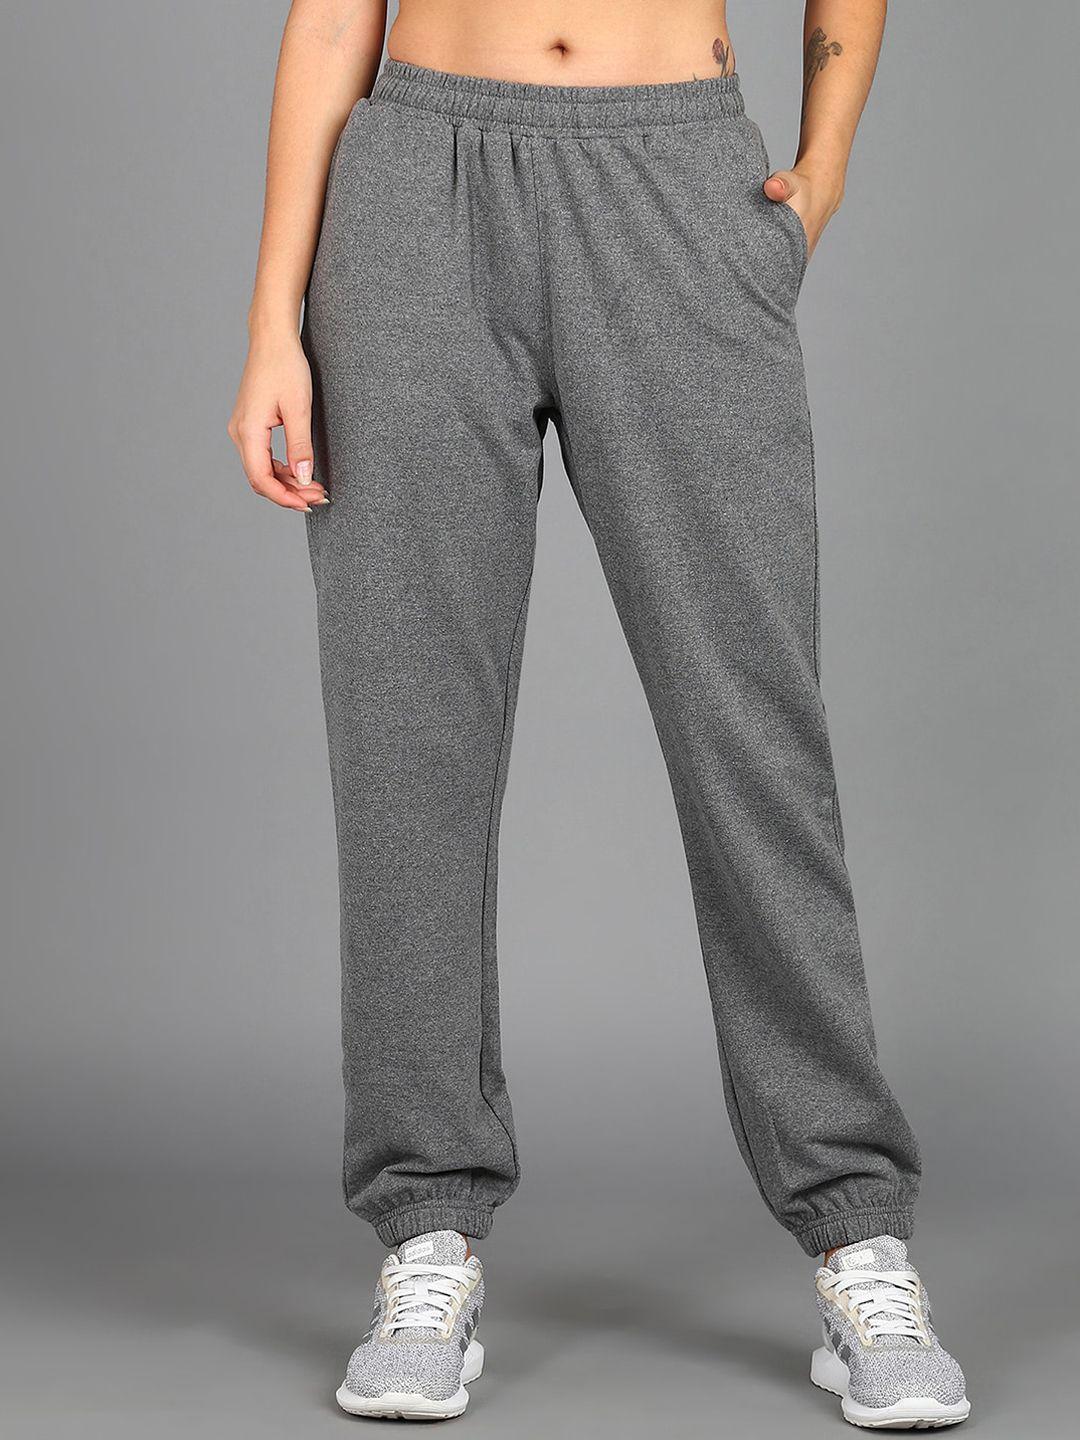 The Roadster Lifestyle Co. Women Mid Rise Fleece Joggers